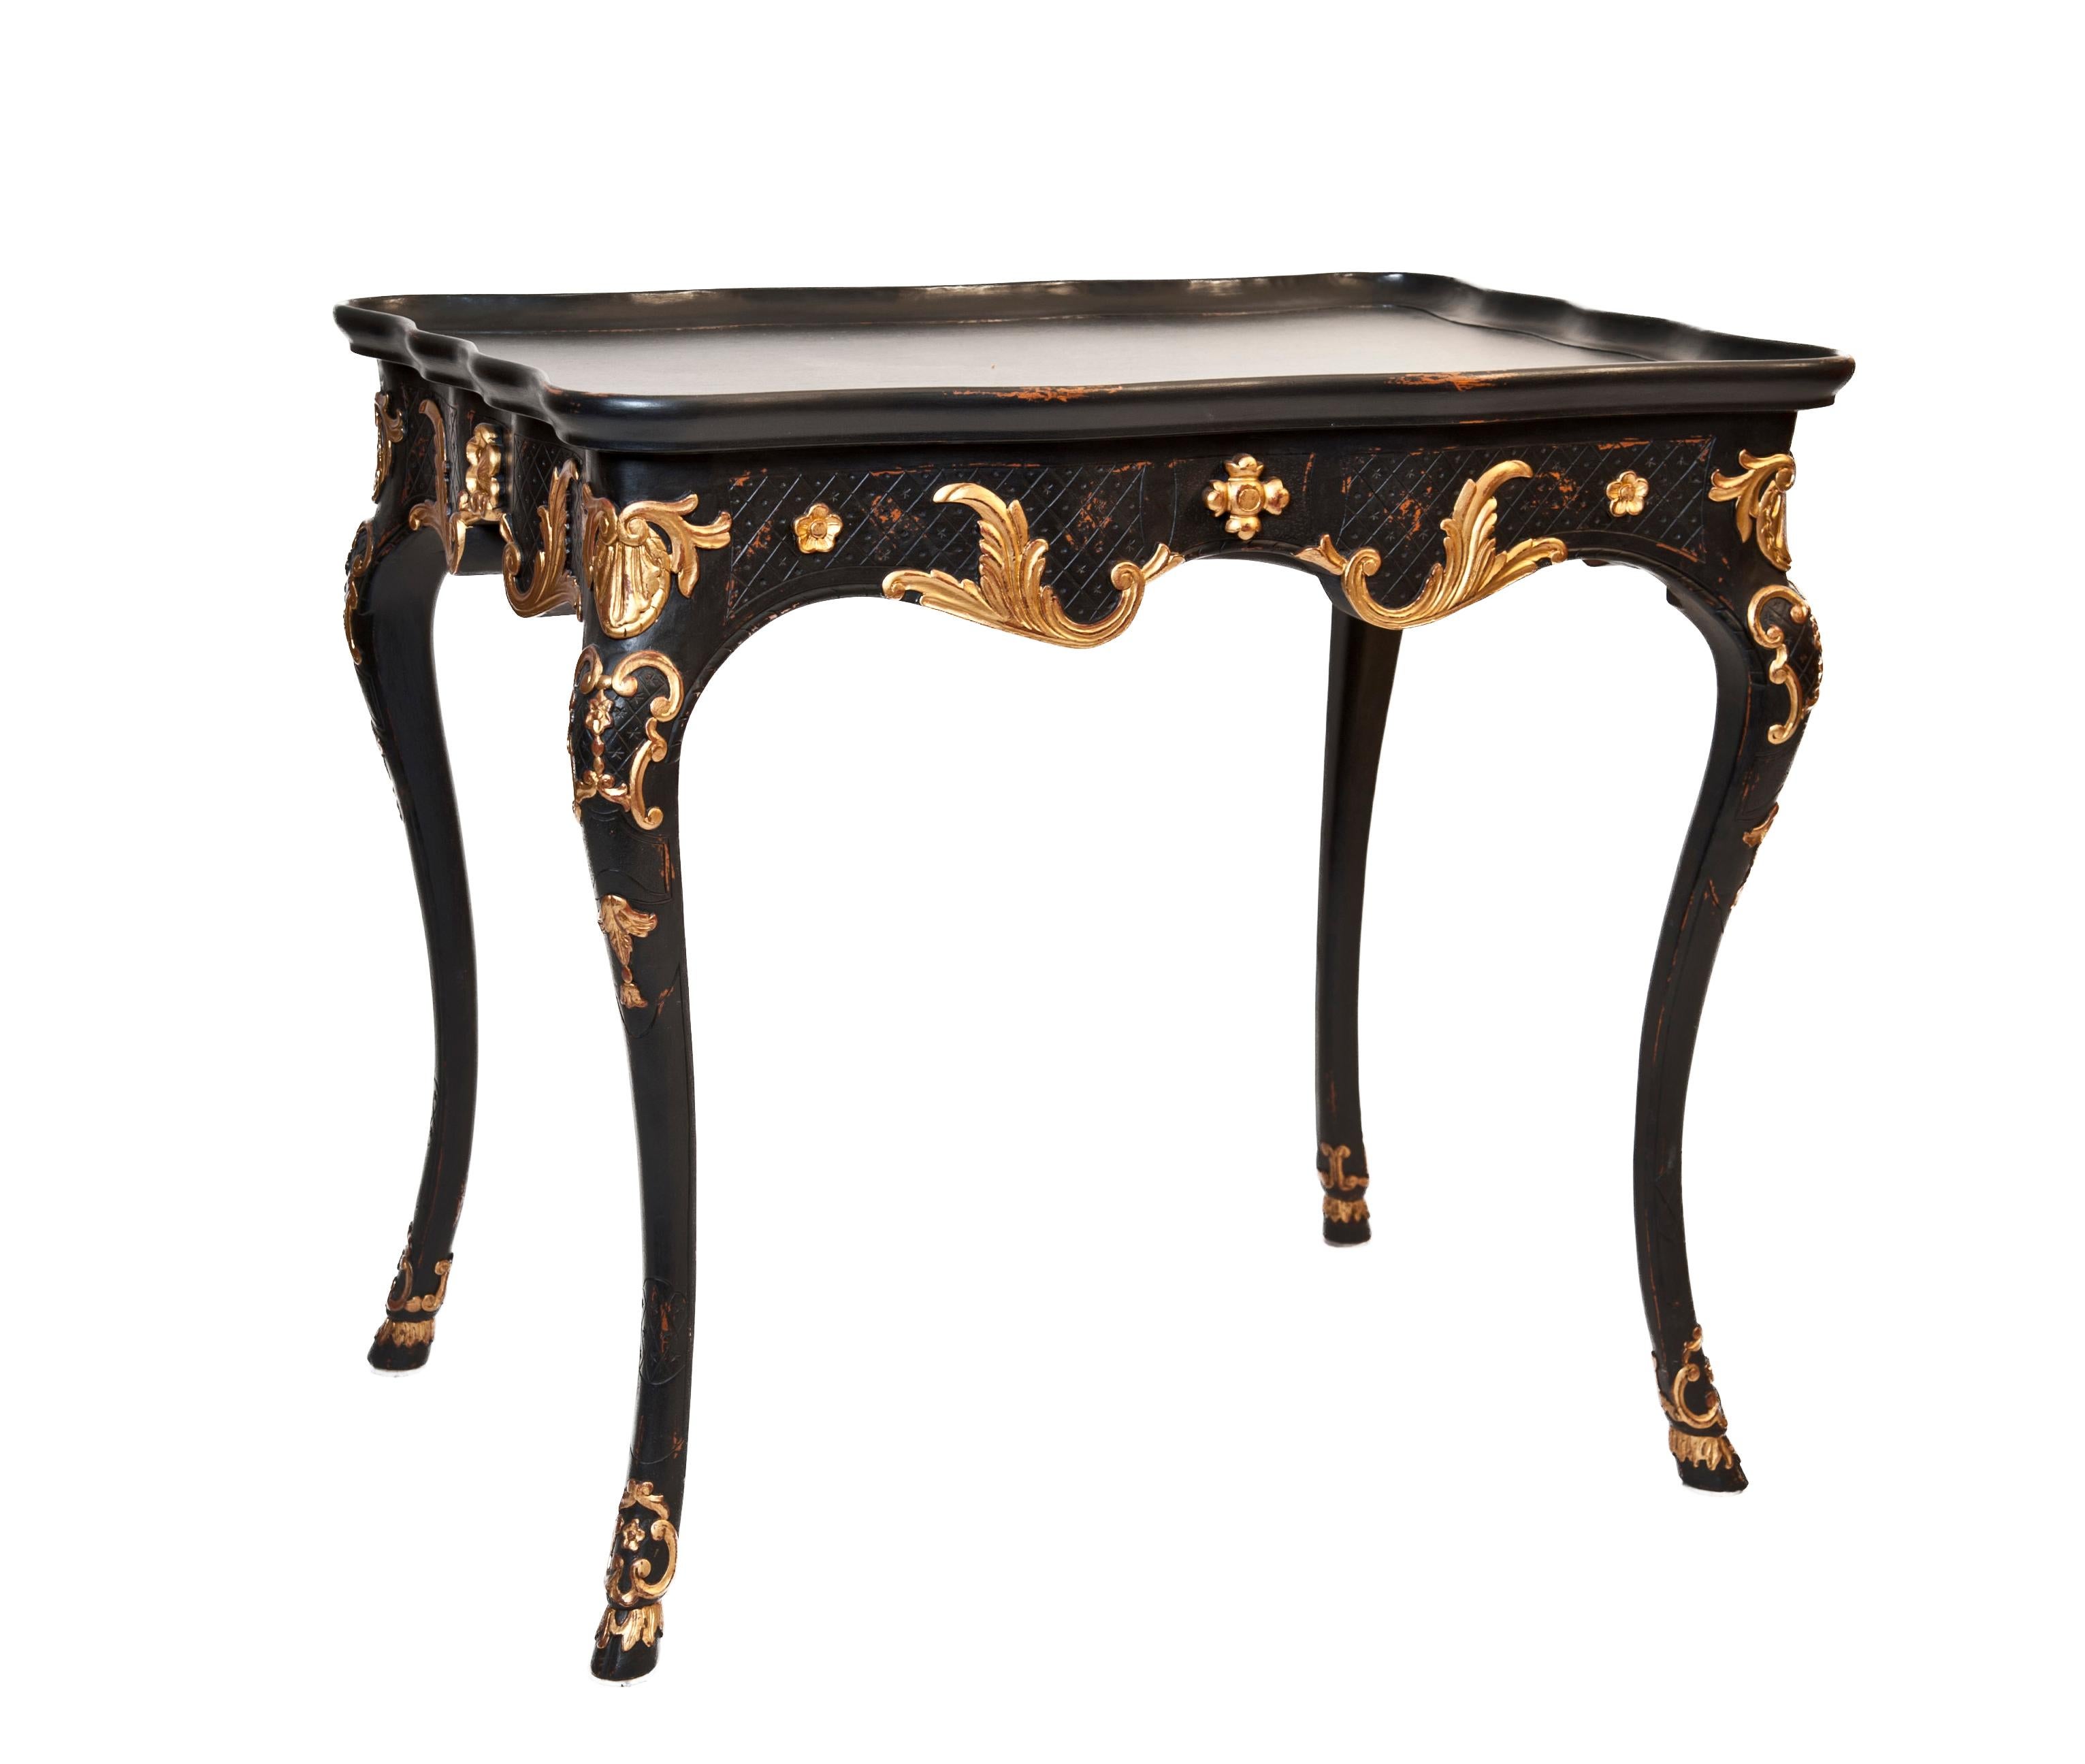 French, 20th century pair of Louis XV style, black chinoiserie tray tables, each with a hidden pull-out drawer. Ebonized with gilt detail, these end tables are a beautiful addition to a room, the satin finish adds a touch of luxury and a touch of